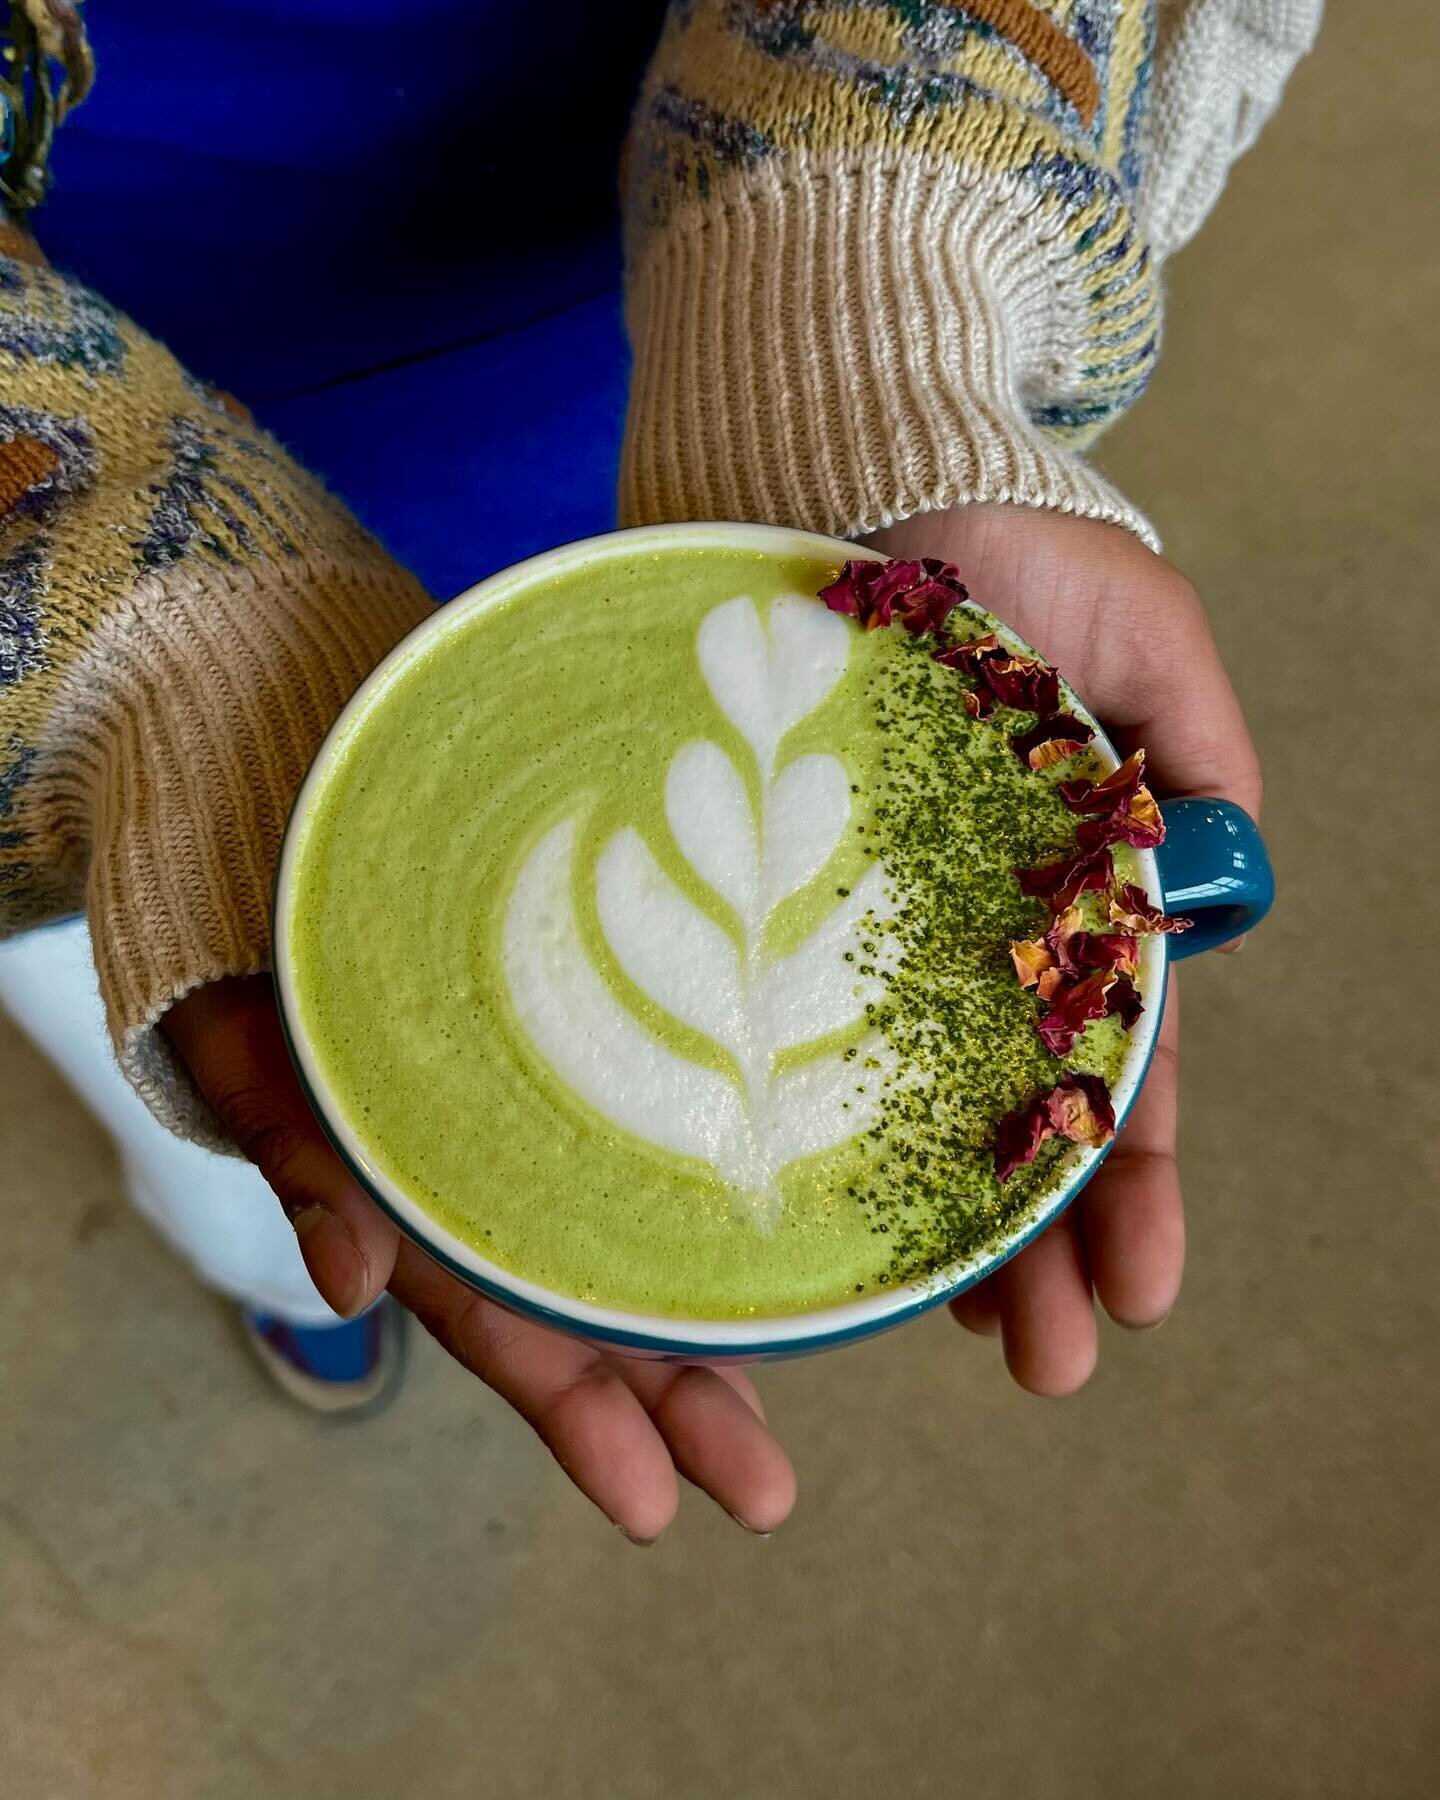 Hey there, lovebirds! 💕 Get ready to fall head over heels for our Valentine&rsquo;s Day specials! Introducing our &lsquo;Strawberry Matcha Forever&rsquo; and &lsquo;Salted Cold Brew.&rsquo;

Starting now through February 29th, both specials are avai